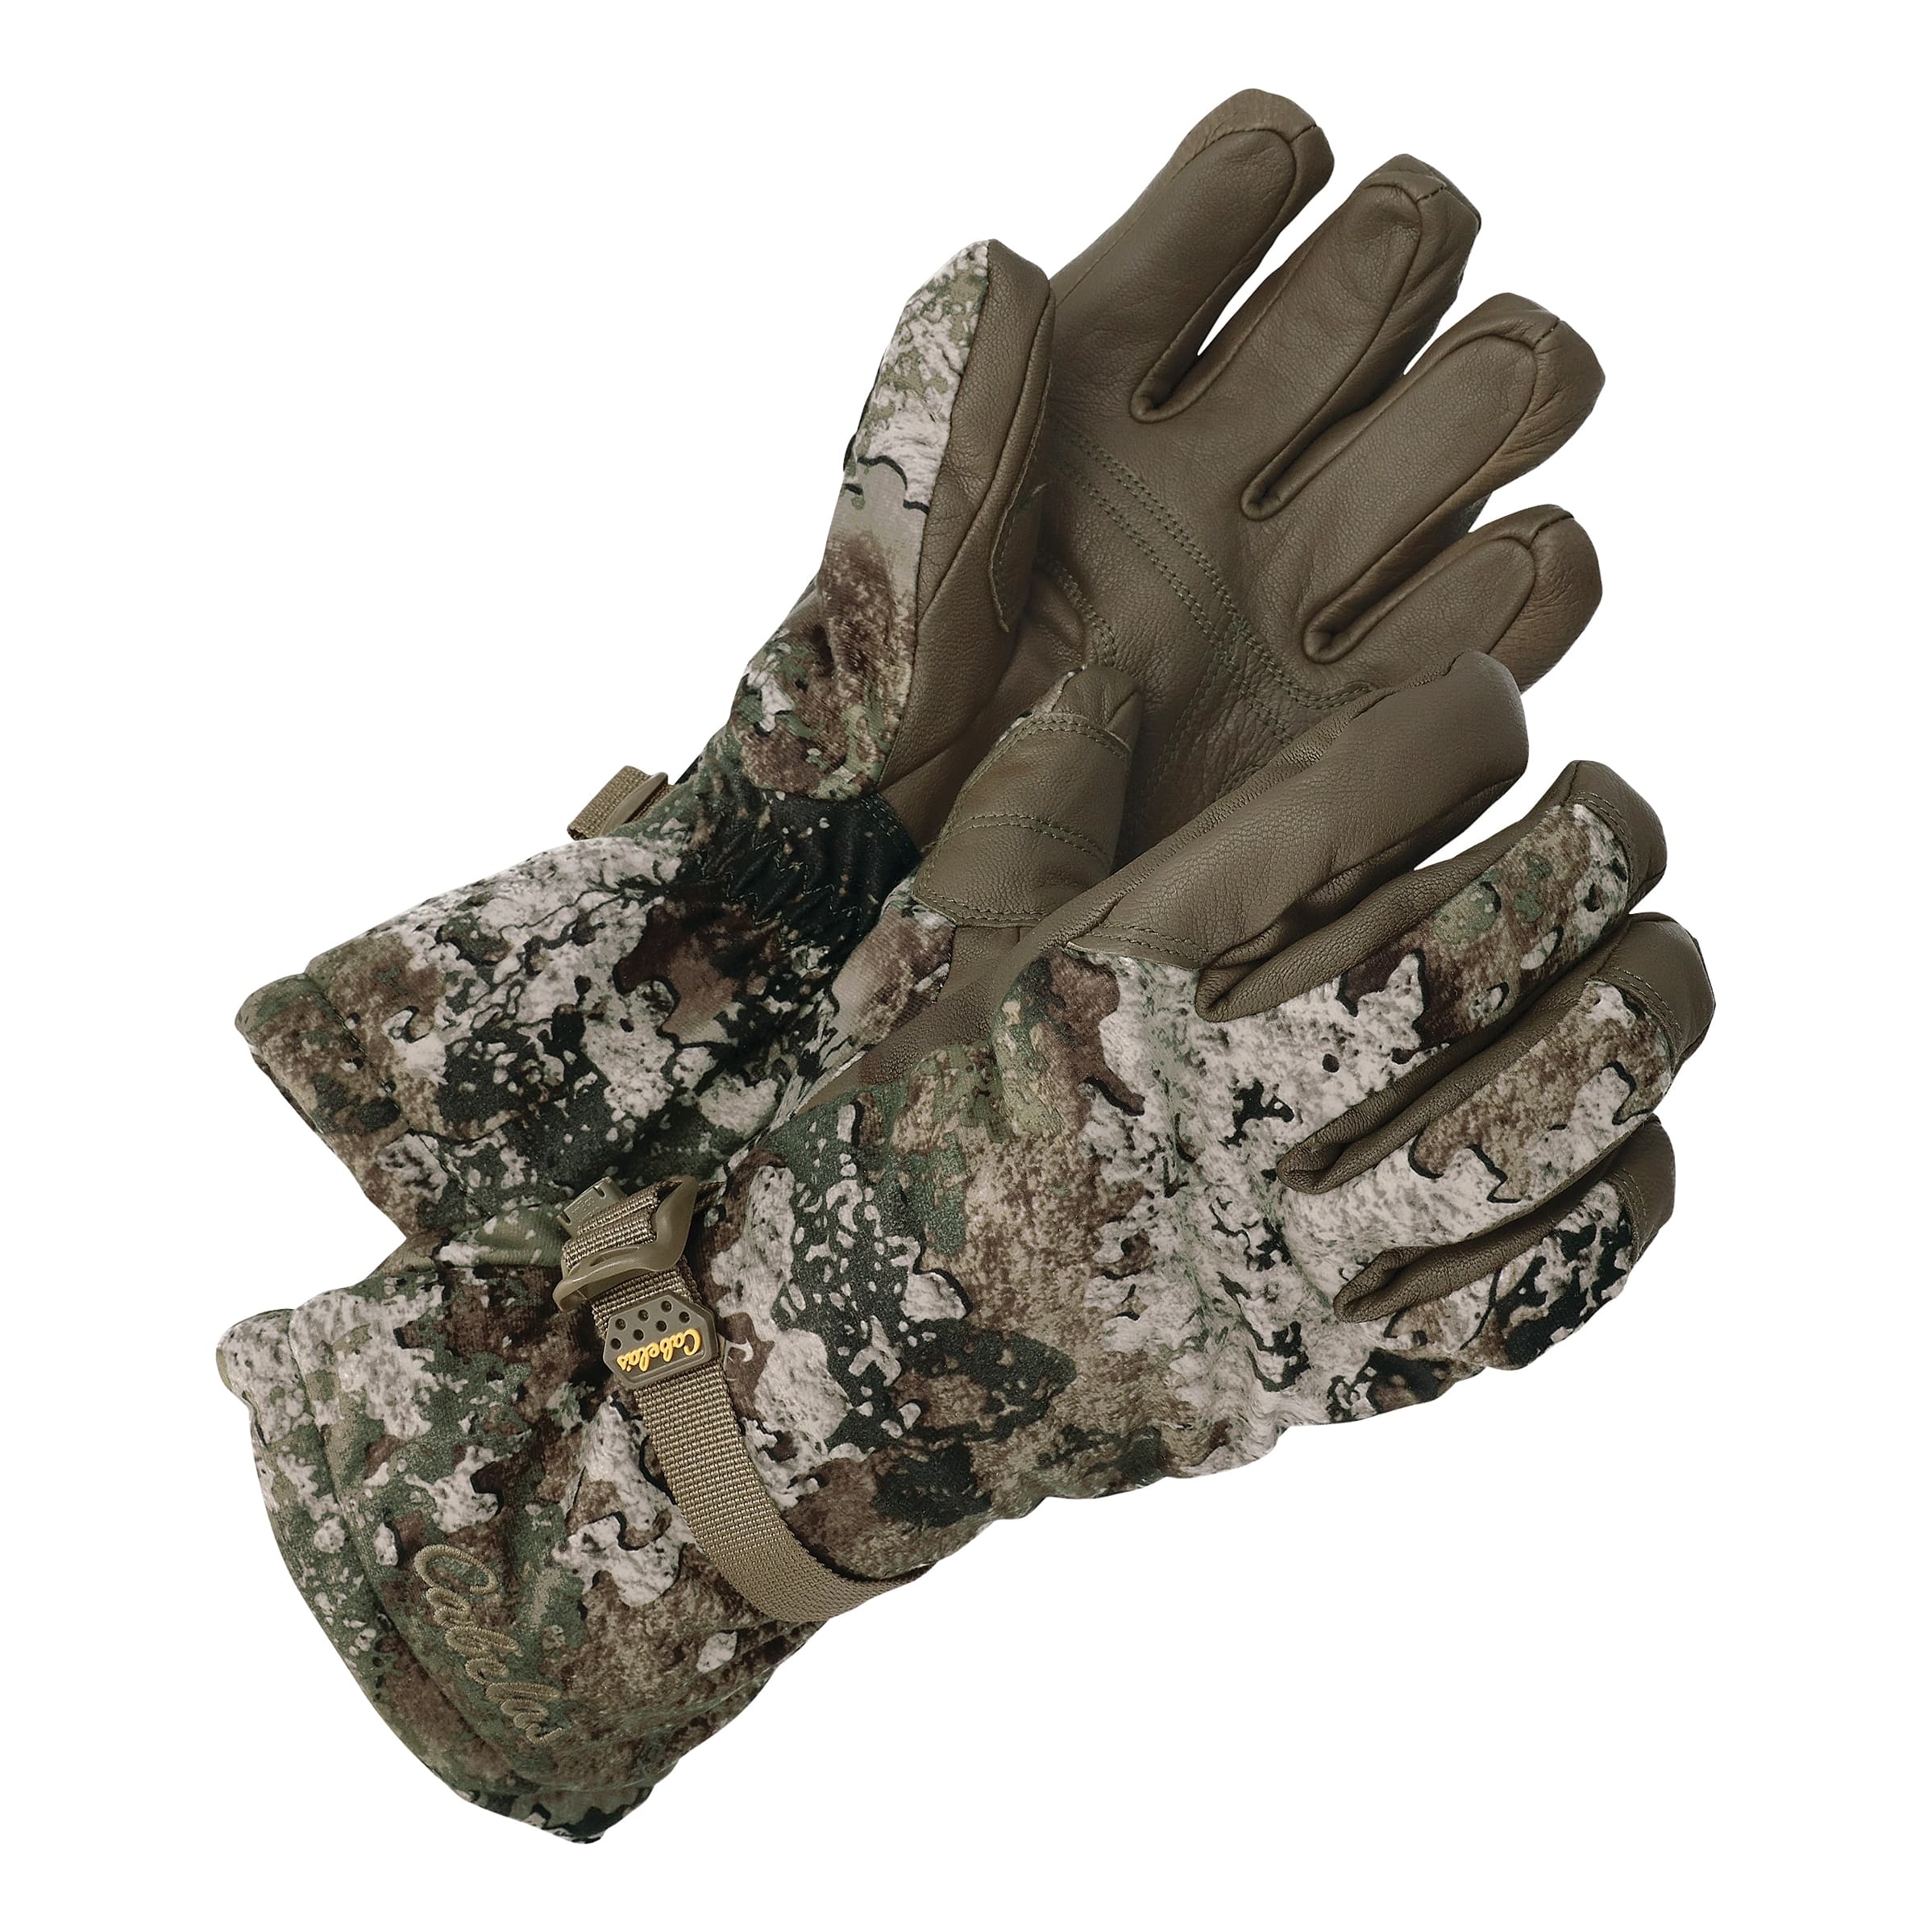 Cabela’s Men’s Extreme Shooting Gloves with GORE-TEX® - Strata